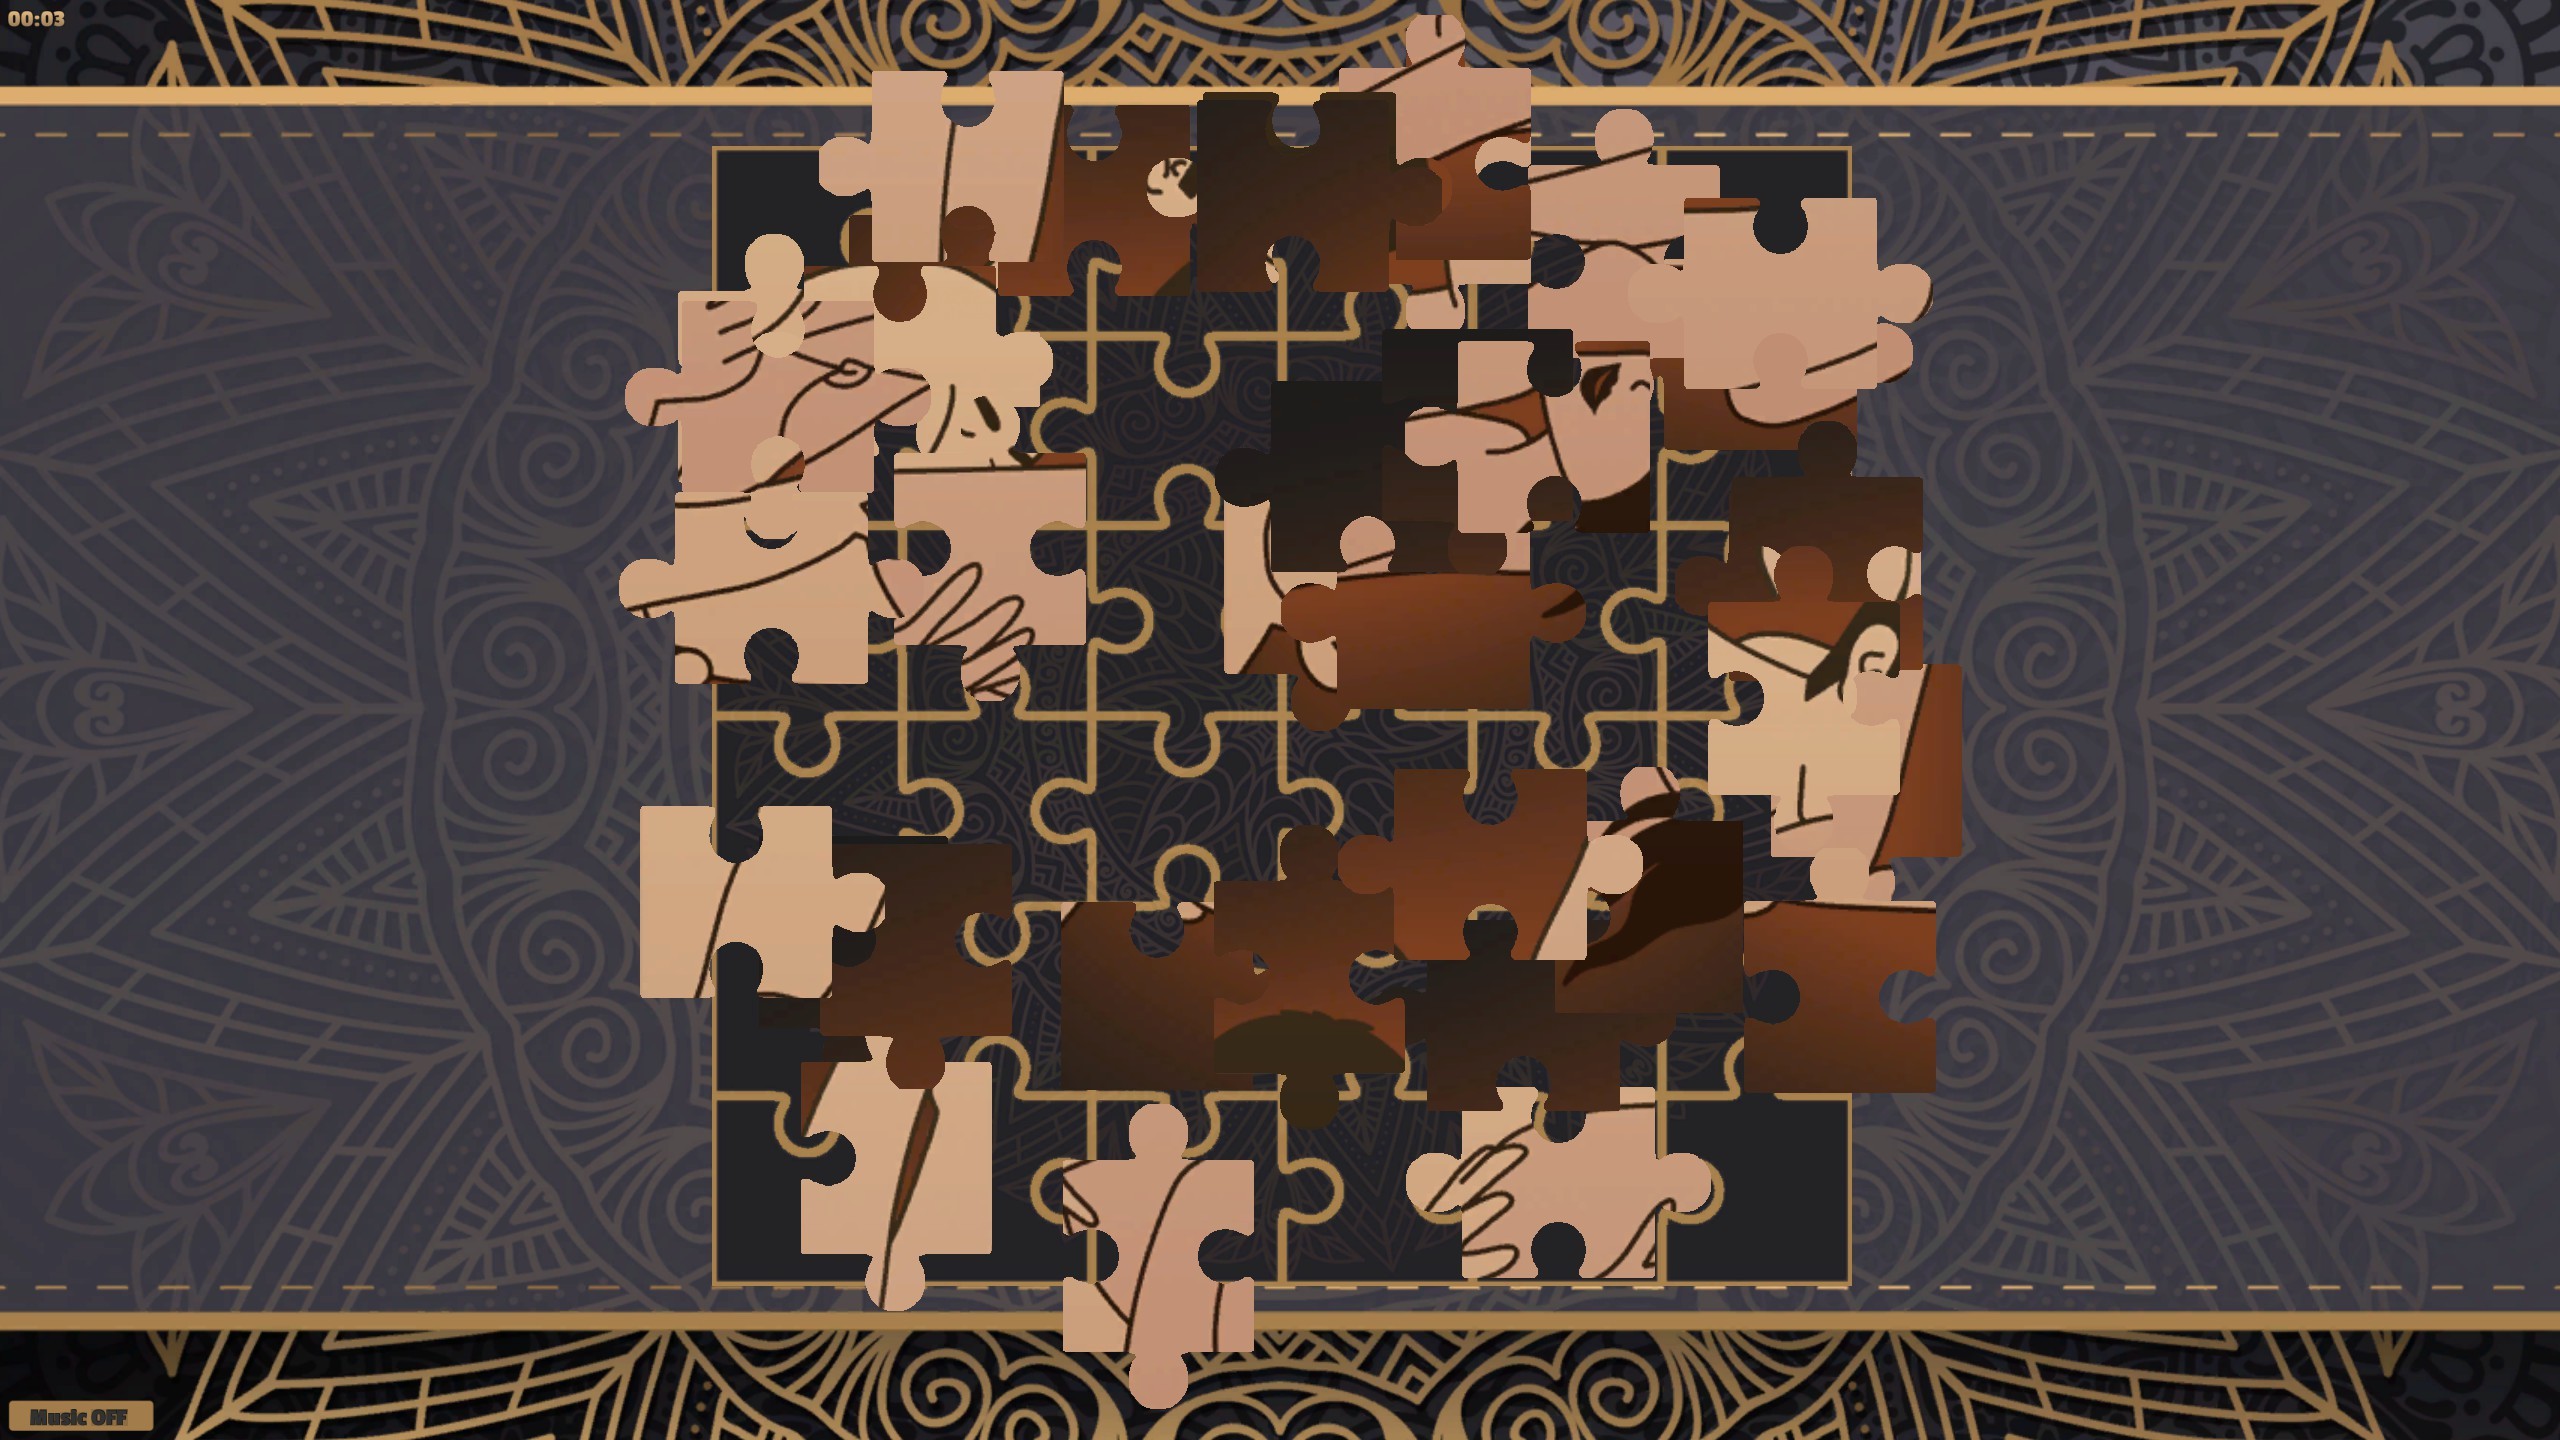 [$ 0.21] LineArt Jigsaw Puzzle - Erotica 5 Steam CD Key